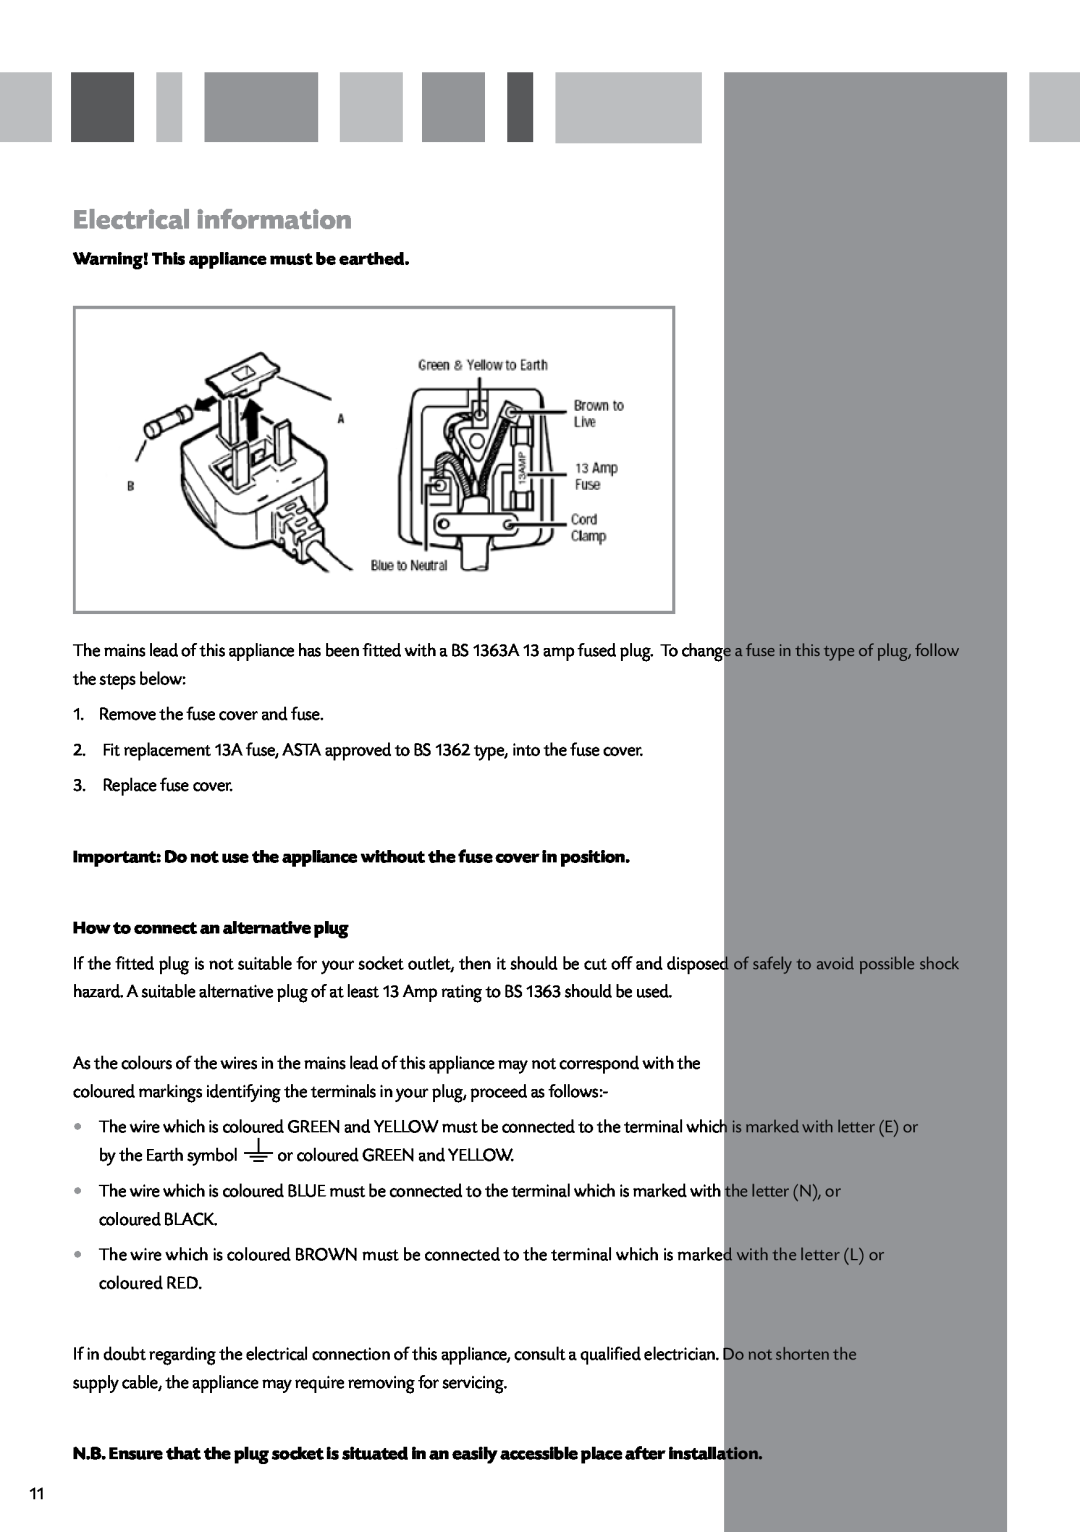 CDA FW950 manual Electrical information, Warning! This appliance must be earthed, How to connect an alternative plug 